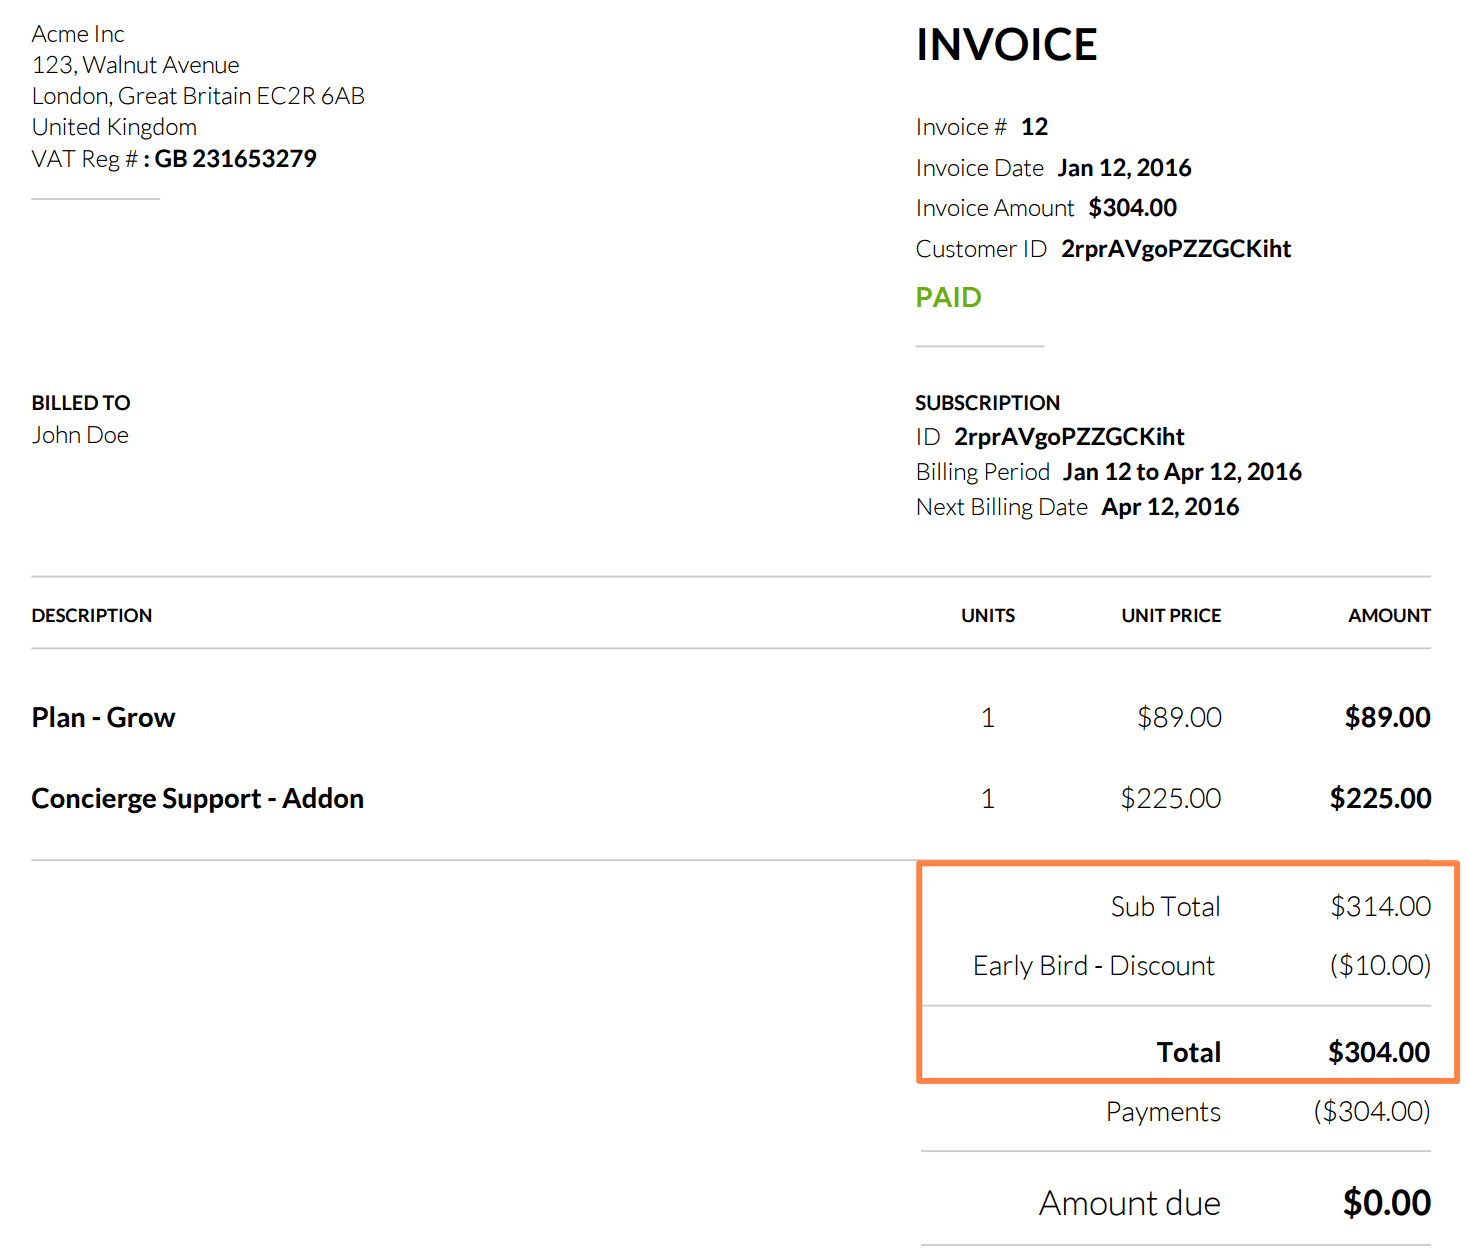 Invoice with coupon applied - Chargebee